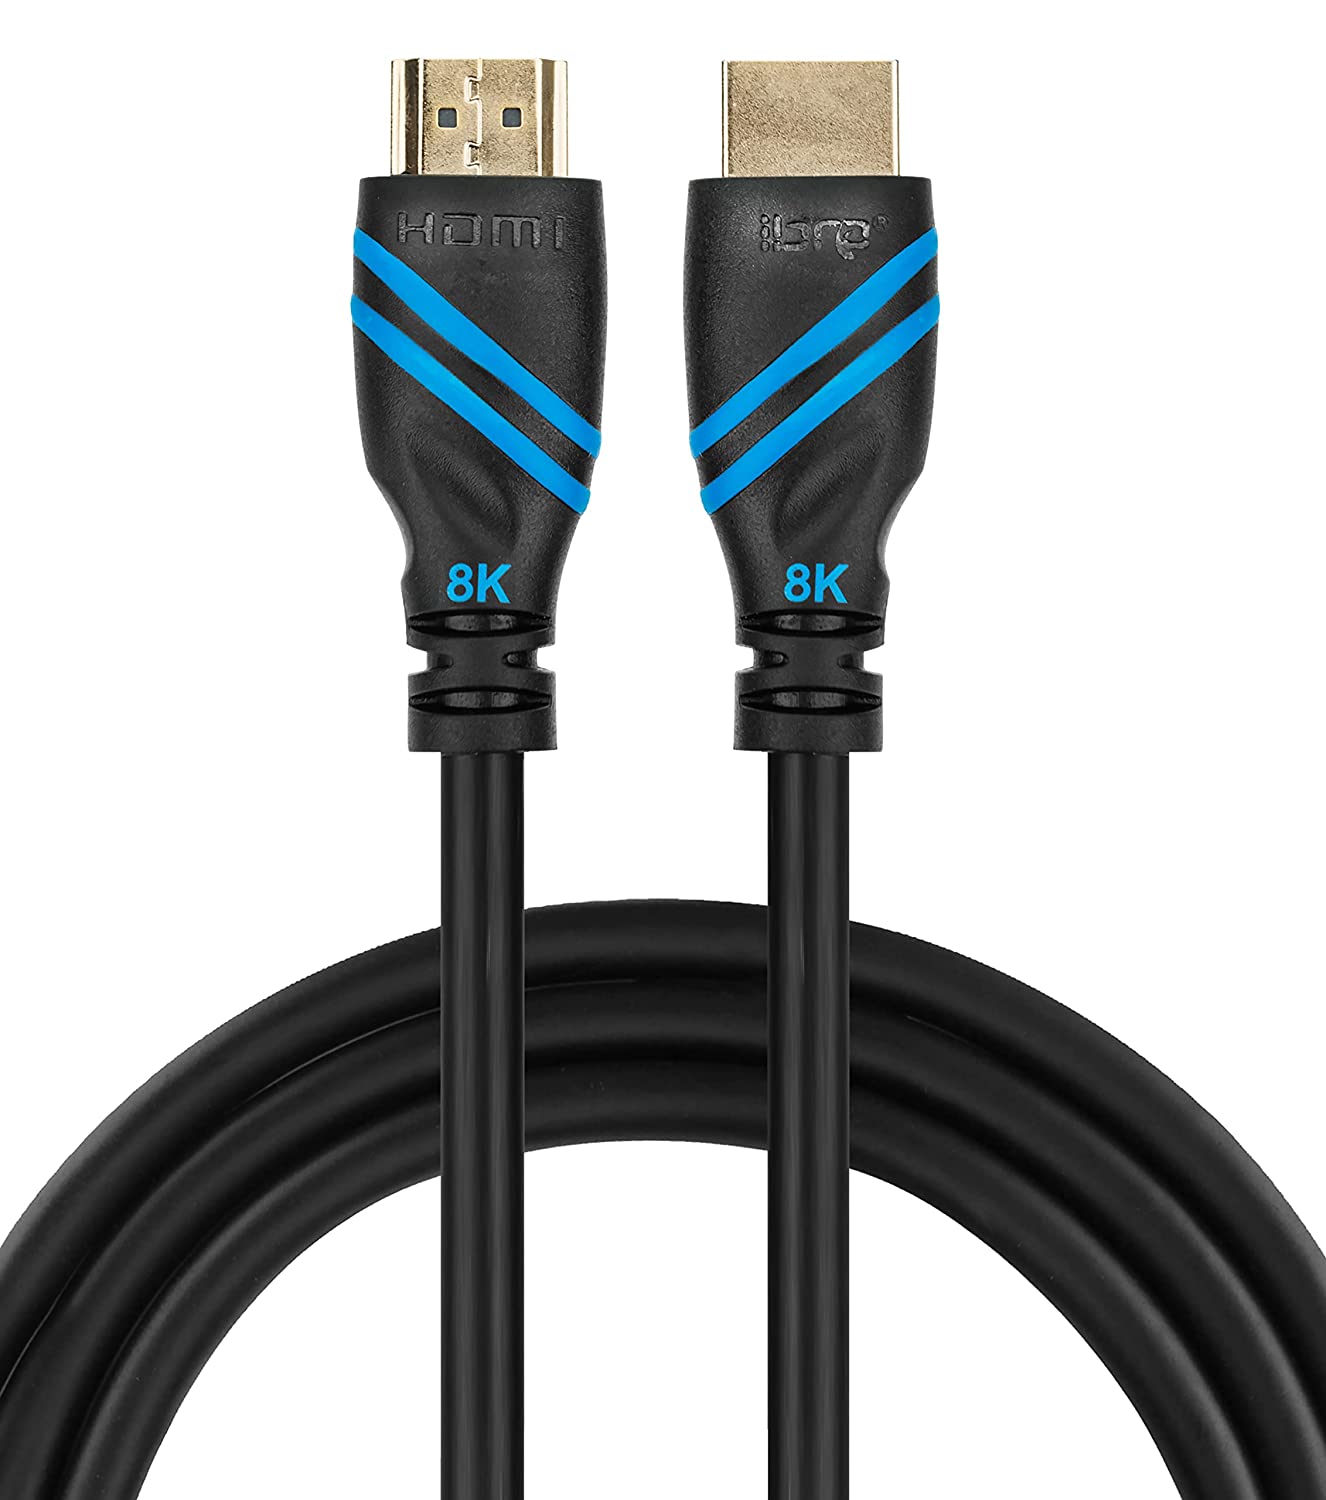 2.1 HDMI Cable 8K, 2M Ultra High-Speed 48Gbps Lead - IBRA Basics Series